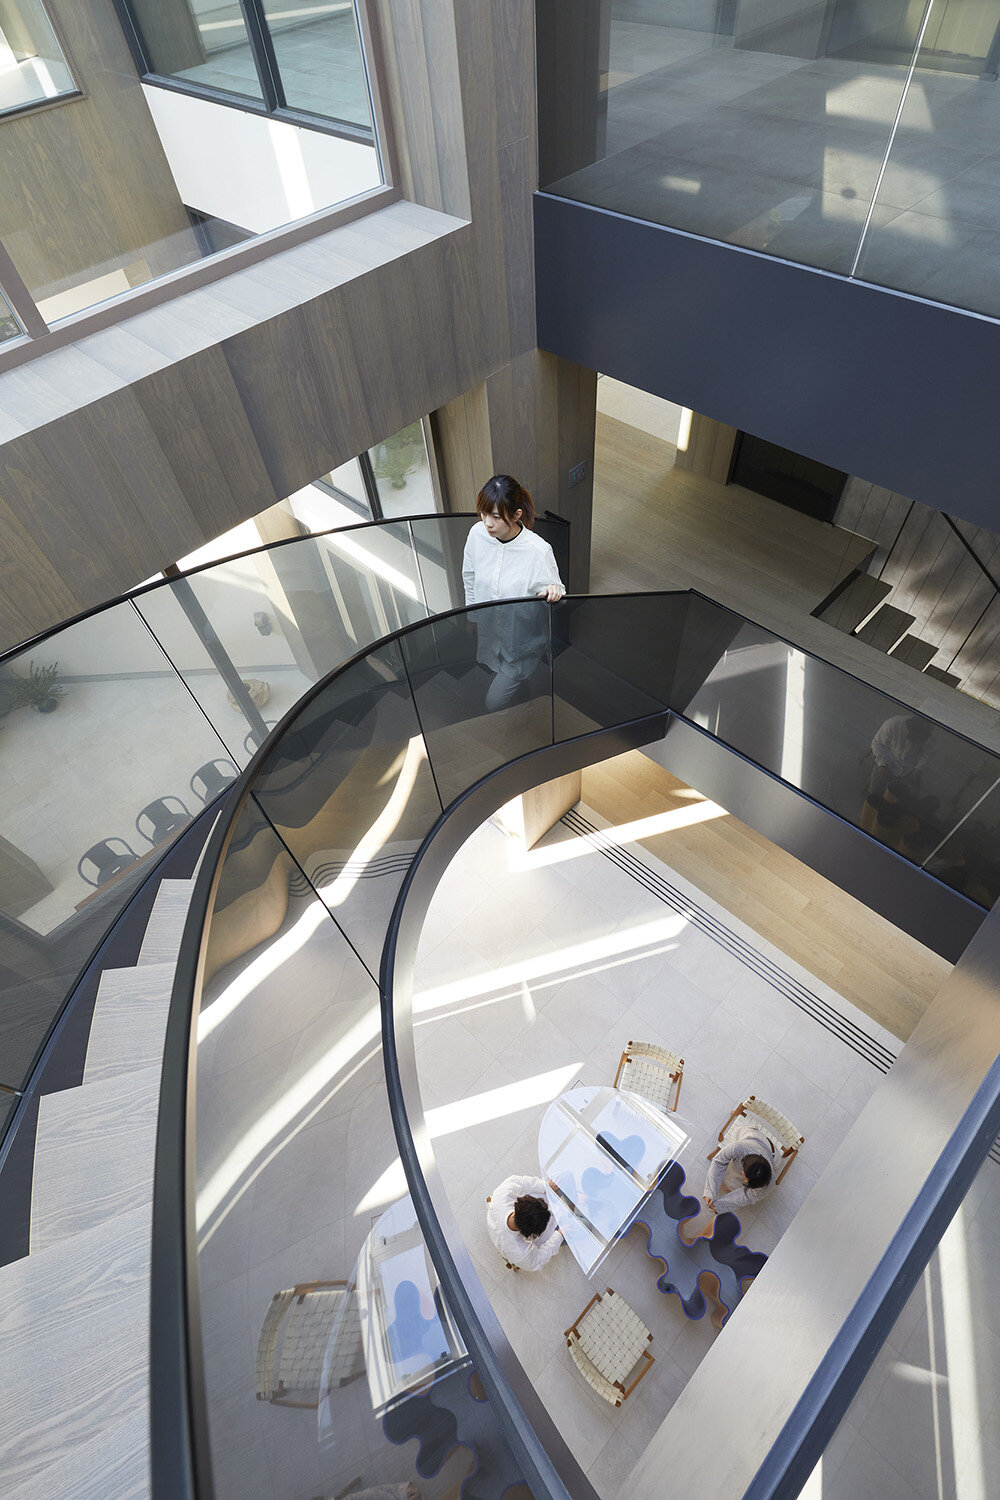  Atrium view with curved staircase of ‘Shoto S’, a residence designed by Japanese architecture design studio SINATO led by Chikara Ono. 